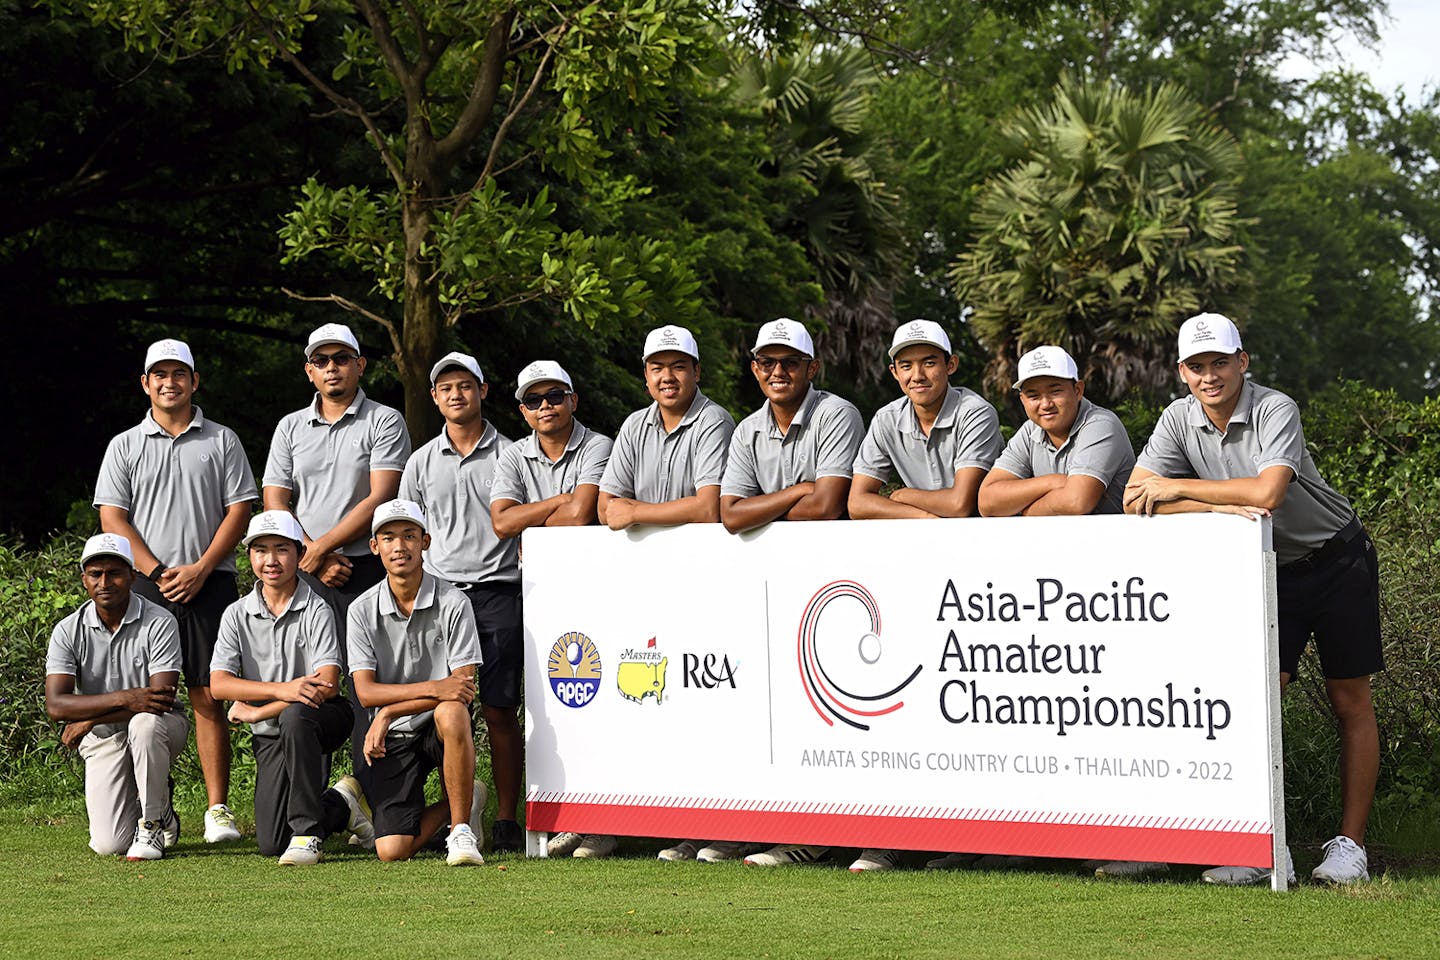 Players pose for a photograph at the AAC Golf Academy on Monday September 5, 2022, at Amata Spring Country Club, Chonburi, Thailand